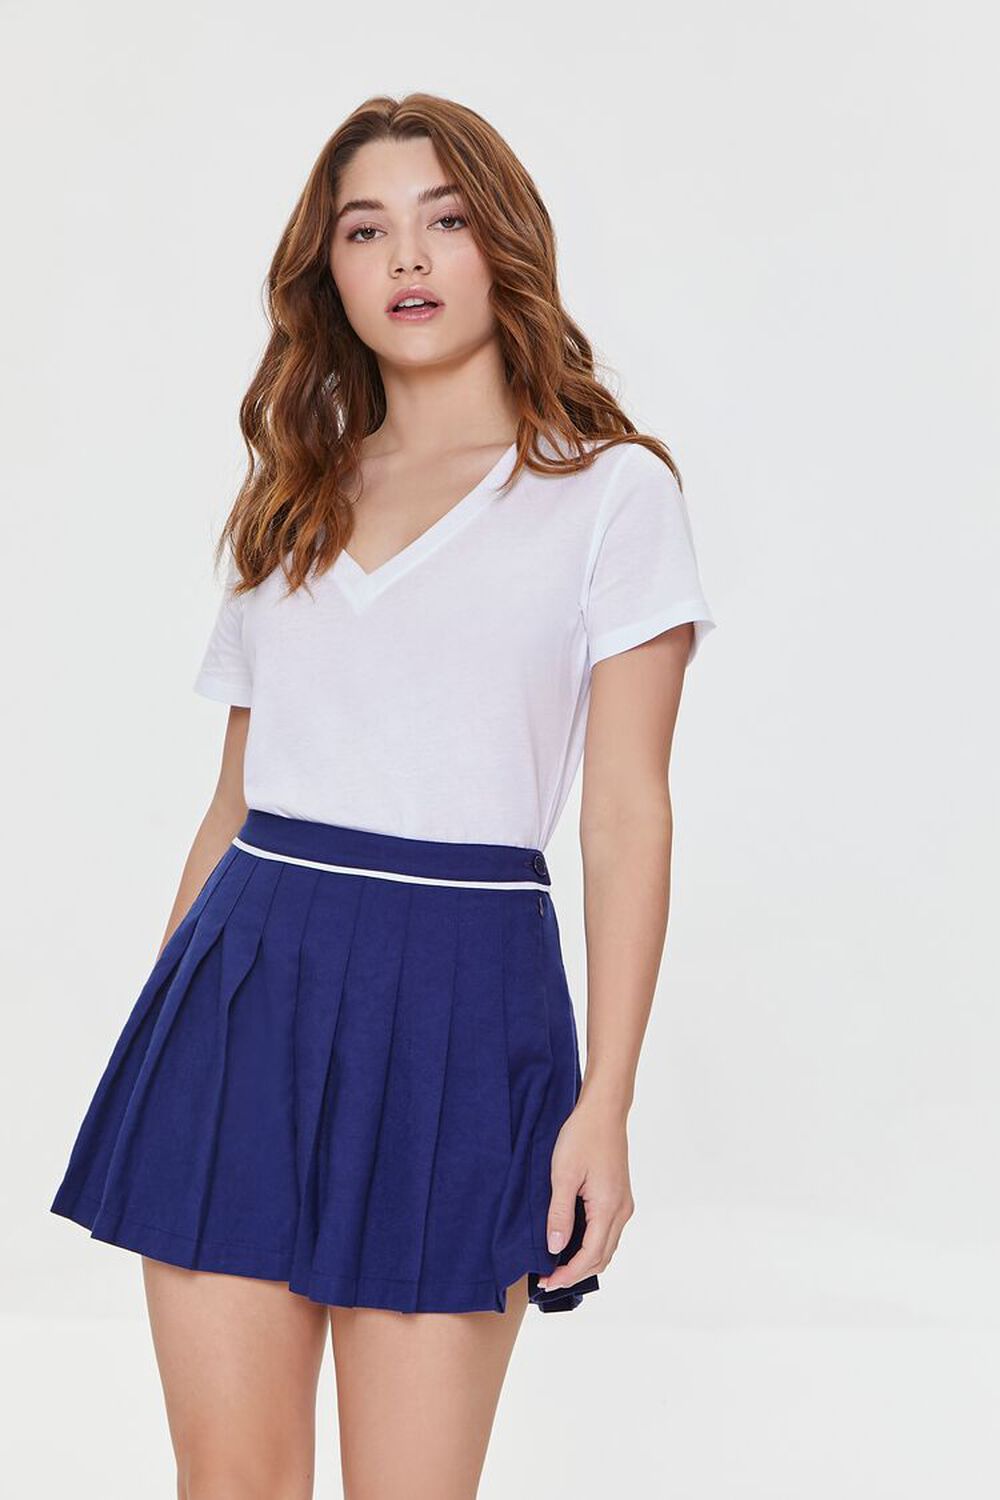 NAVY/WHITE Pleated A-Line Mini Skirt, image 1